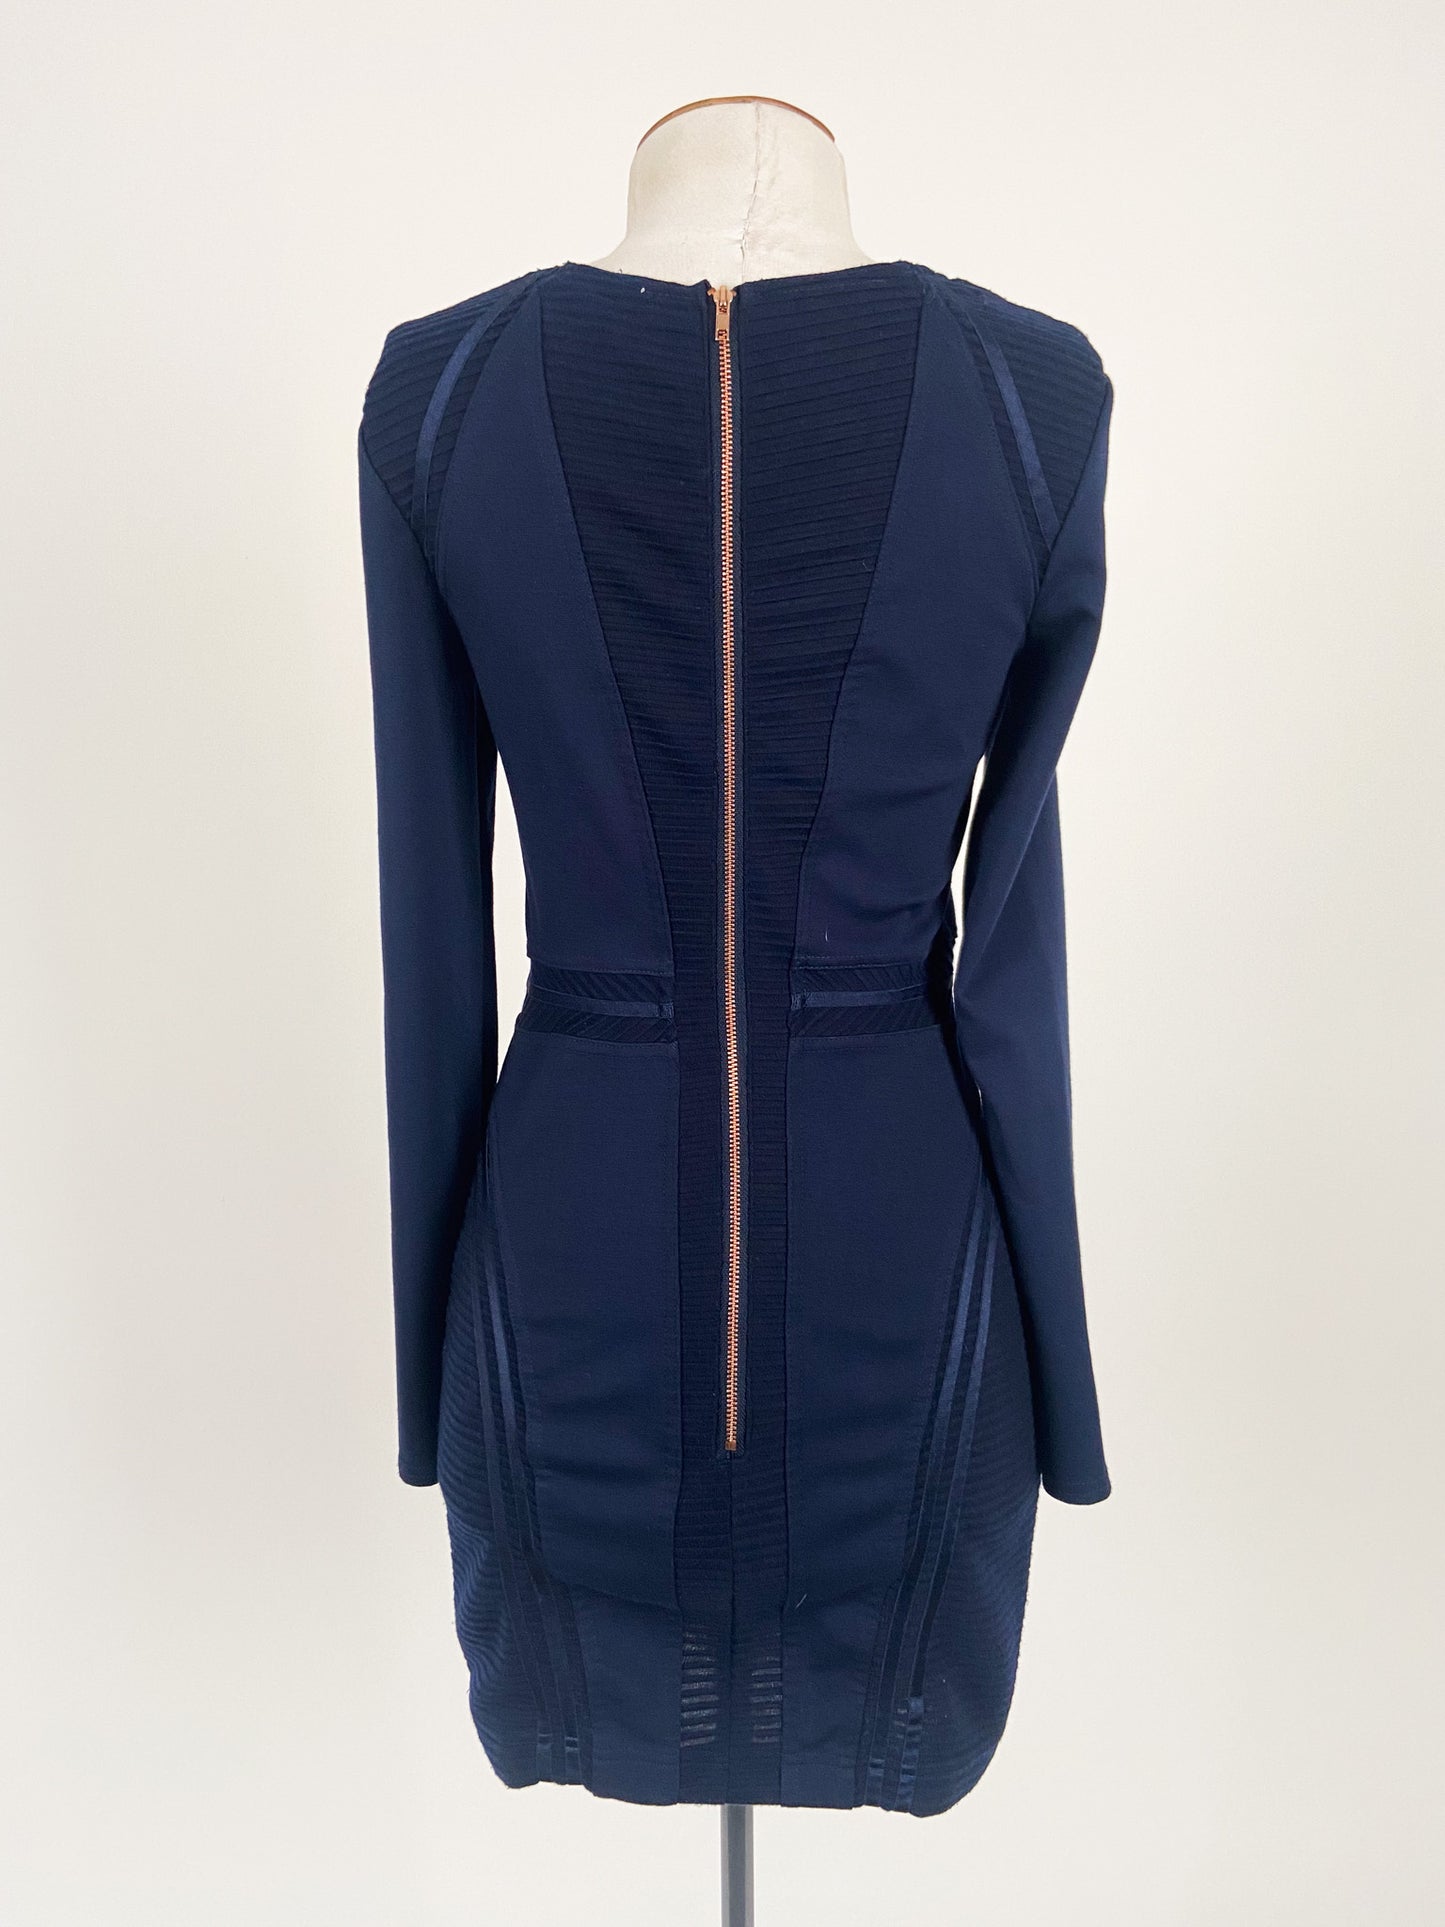 Finders Keepers | Navy Formal/Workwear Dress | Size S